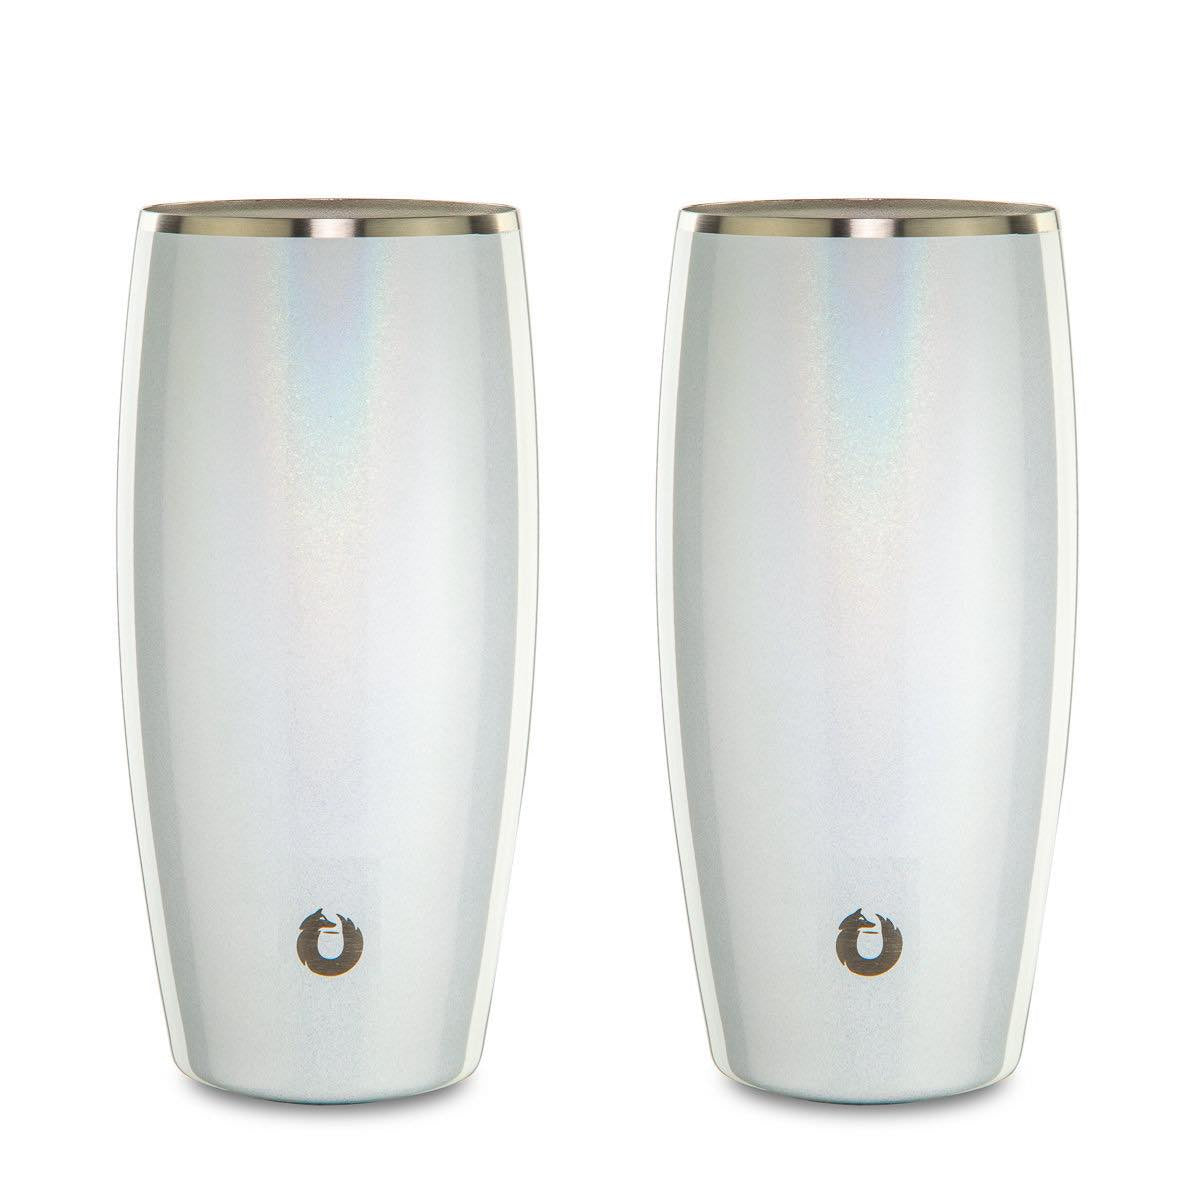 Snowfox Insulated Stainless Steel Margarita and Martini Cocktail Glass, Set of 2, White/Gold